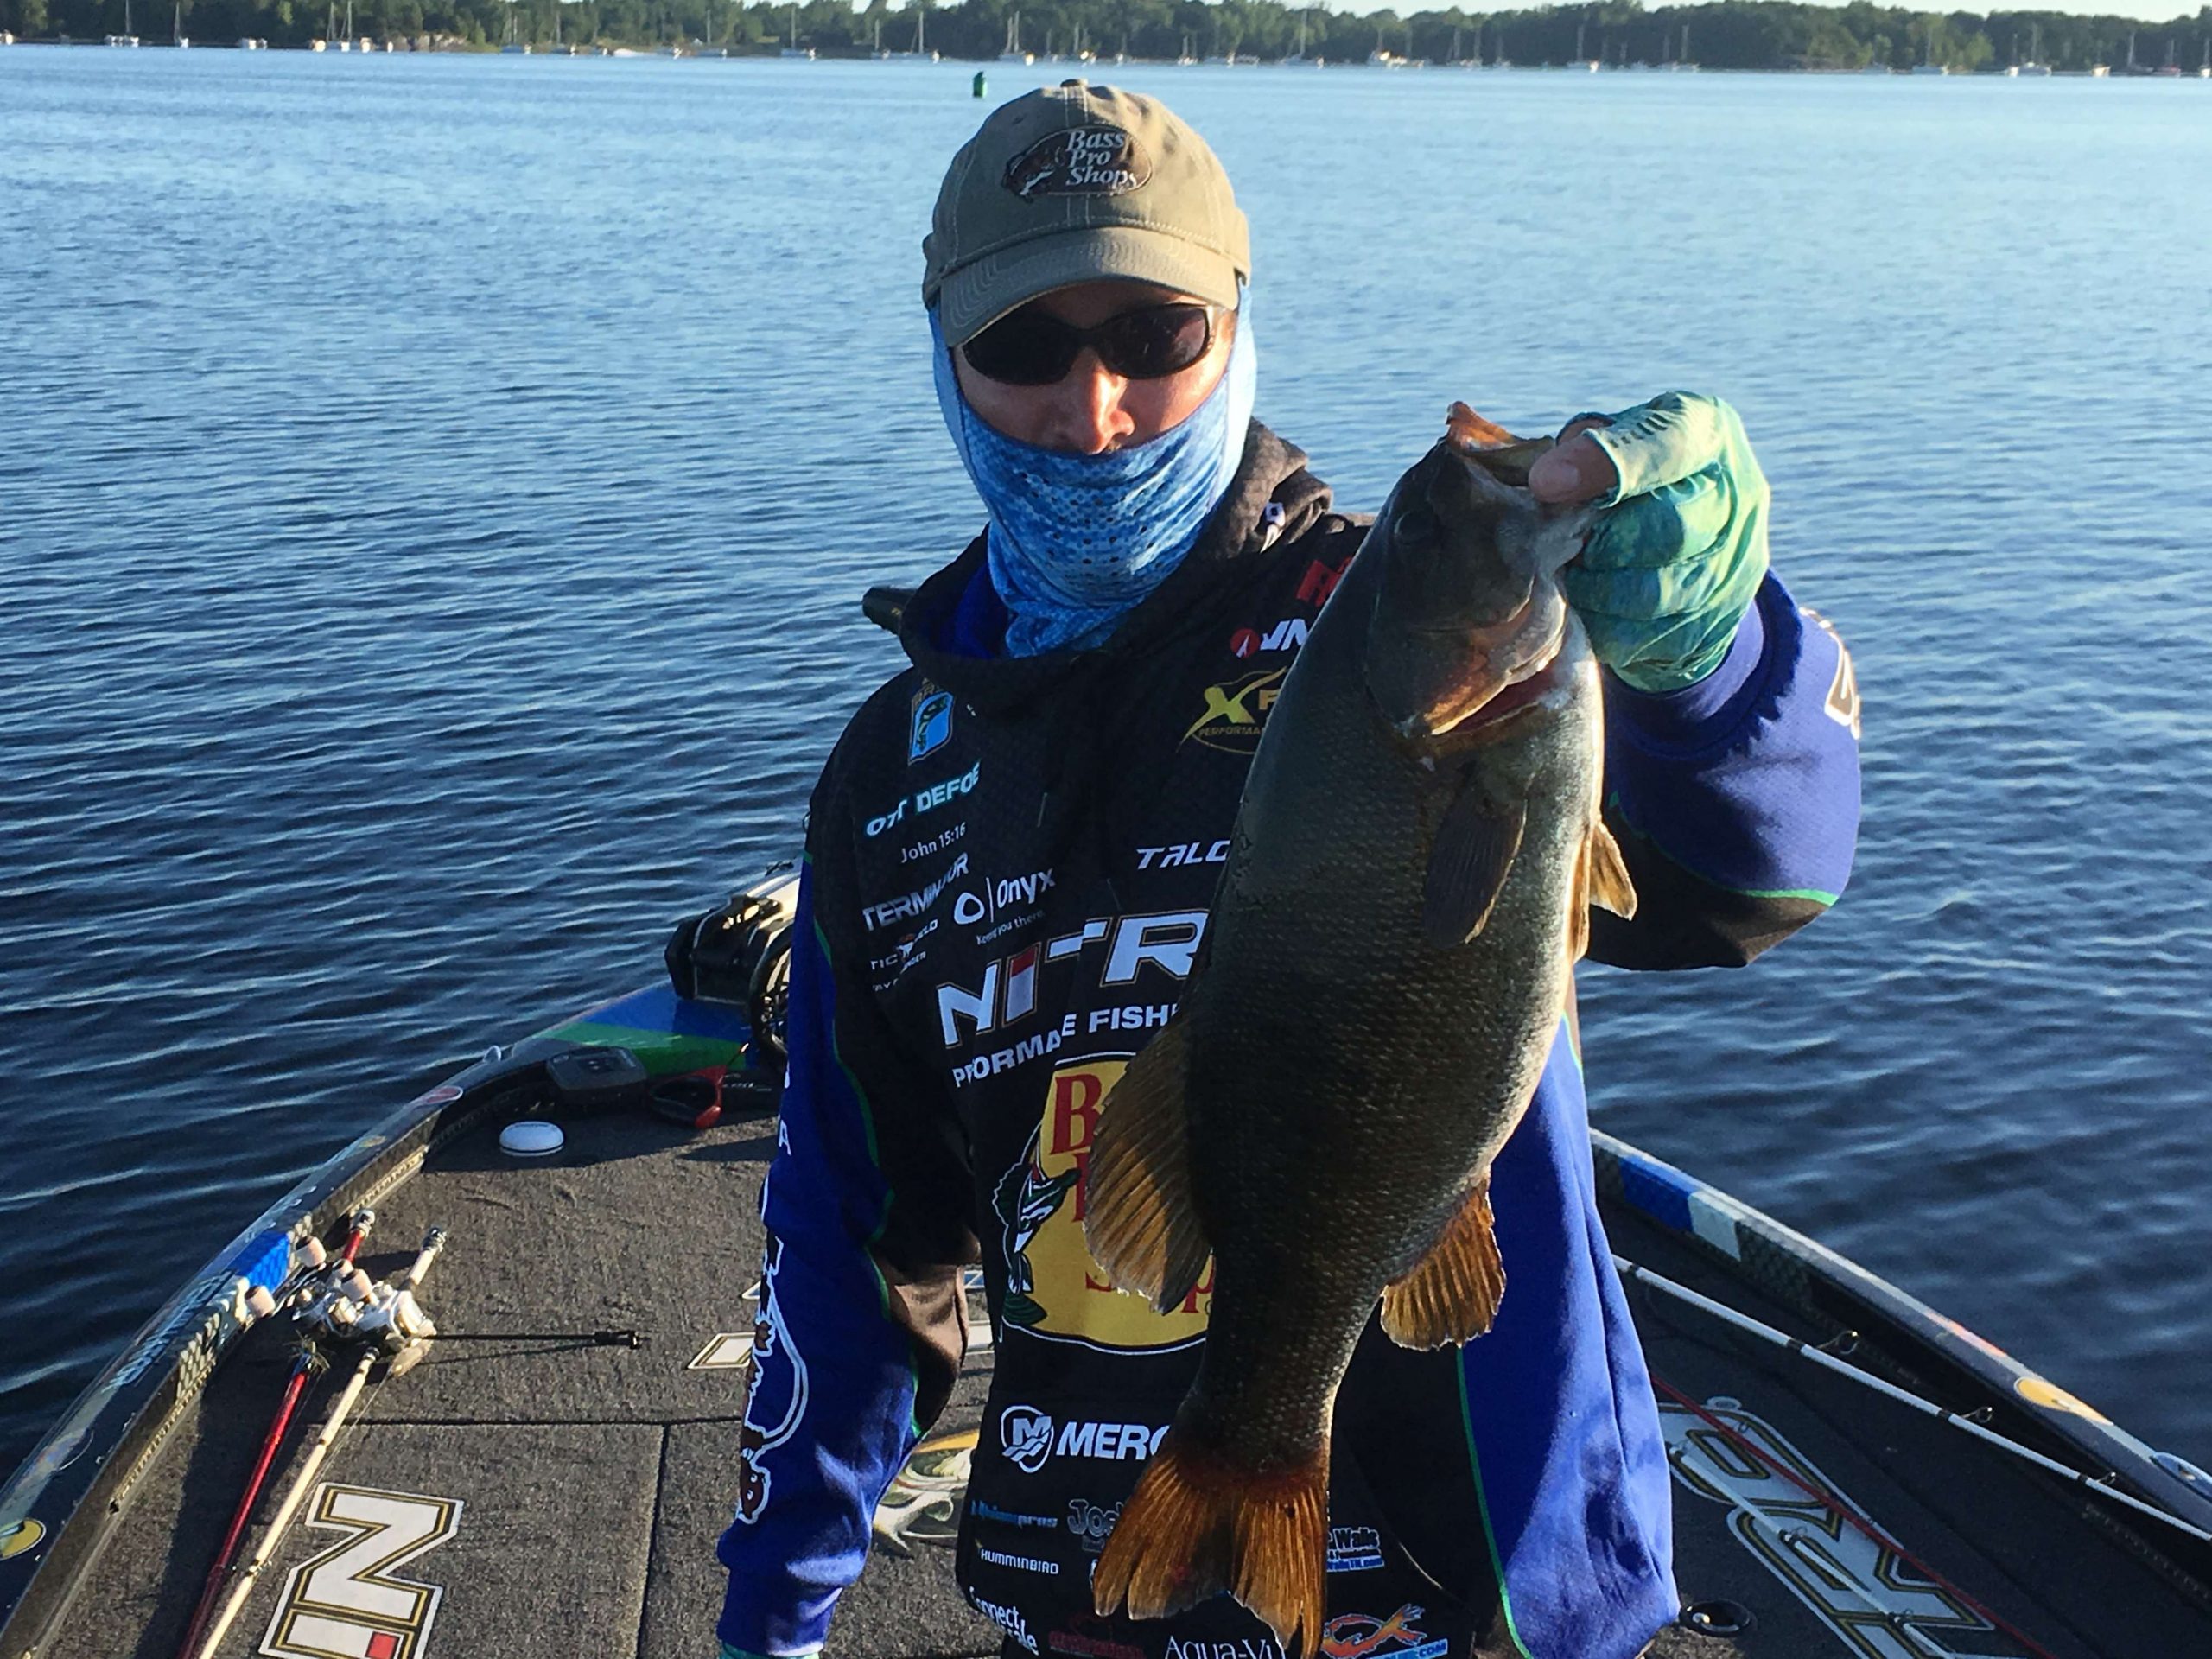 Ott DeFoe on the board with this nice smallie! Morning sunshine!

